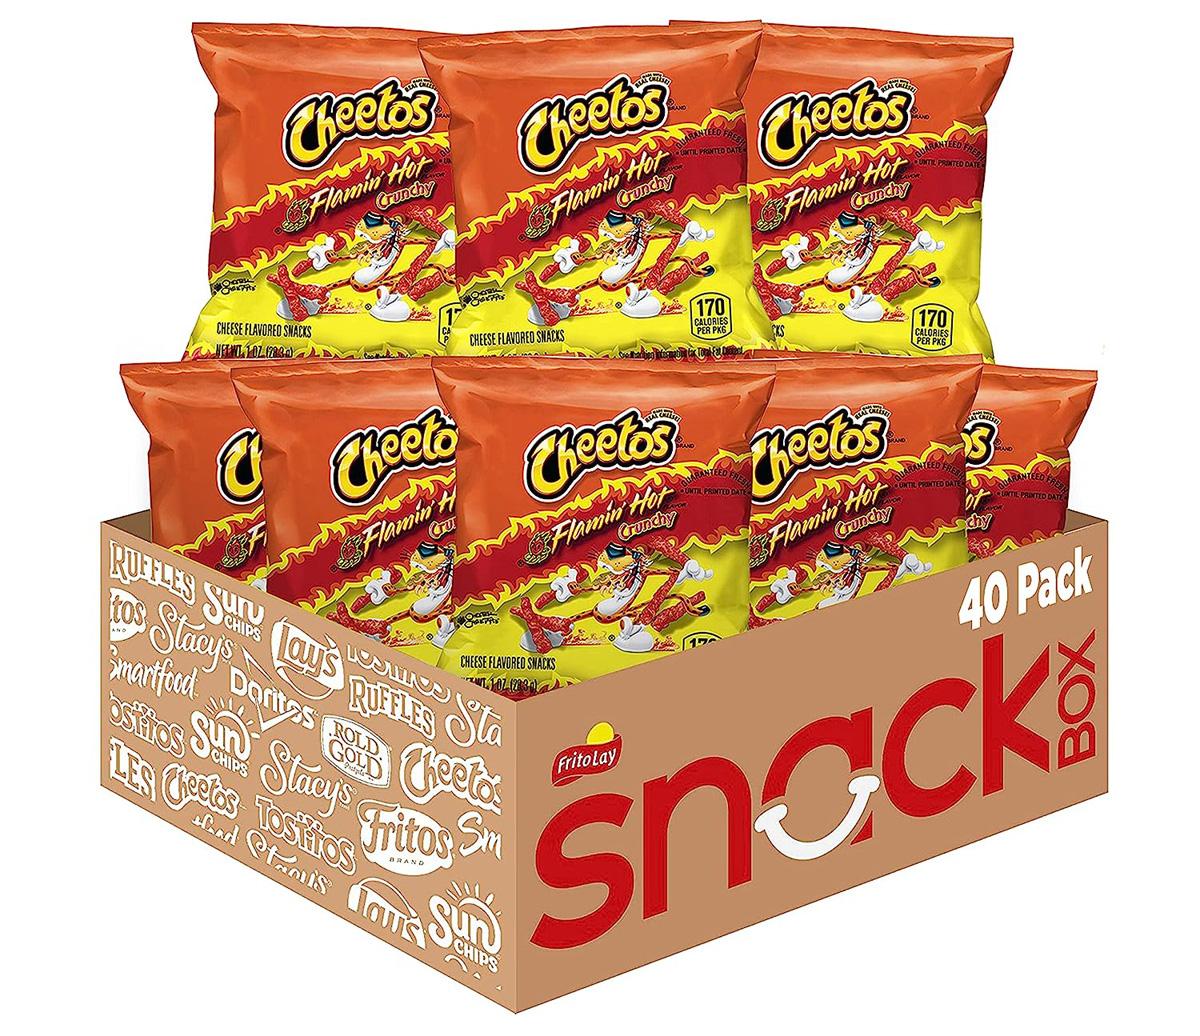 Cheetos Crunchy Flamin Hot Cheese Flavored Snacks 40 Pack for $13.47 Shipped